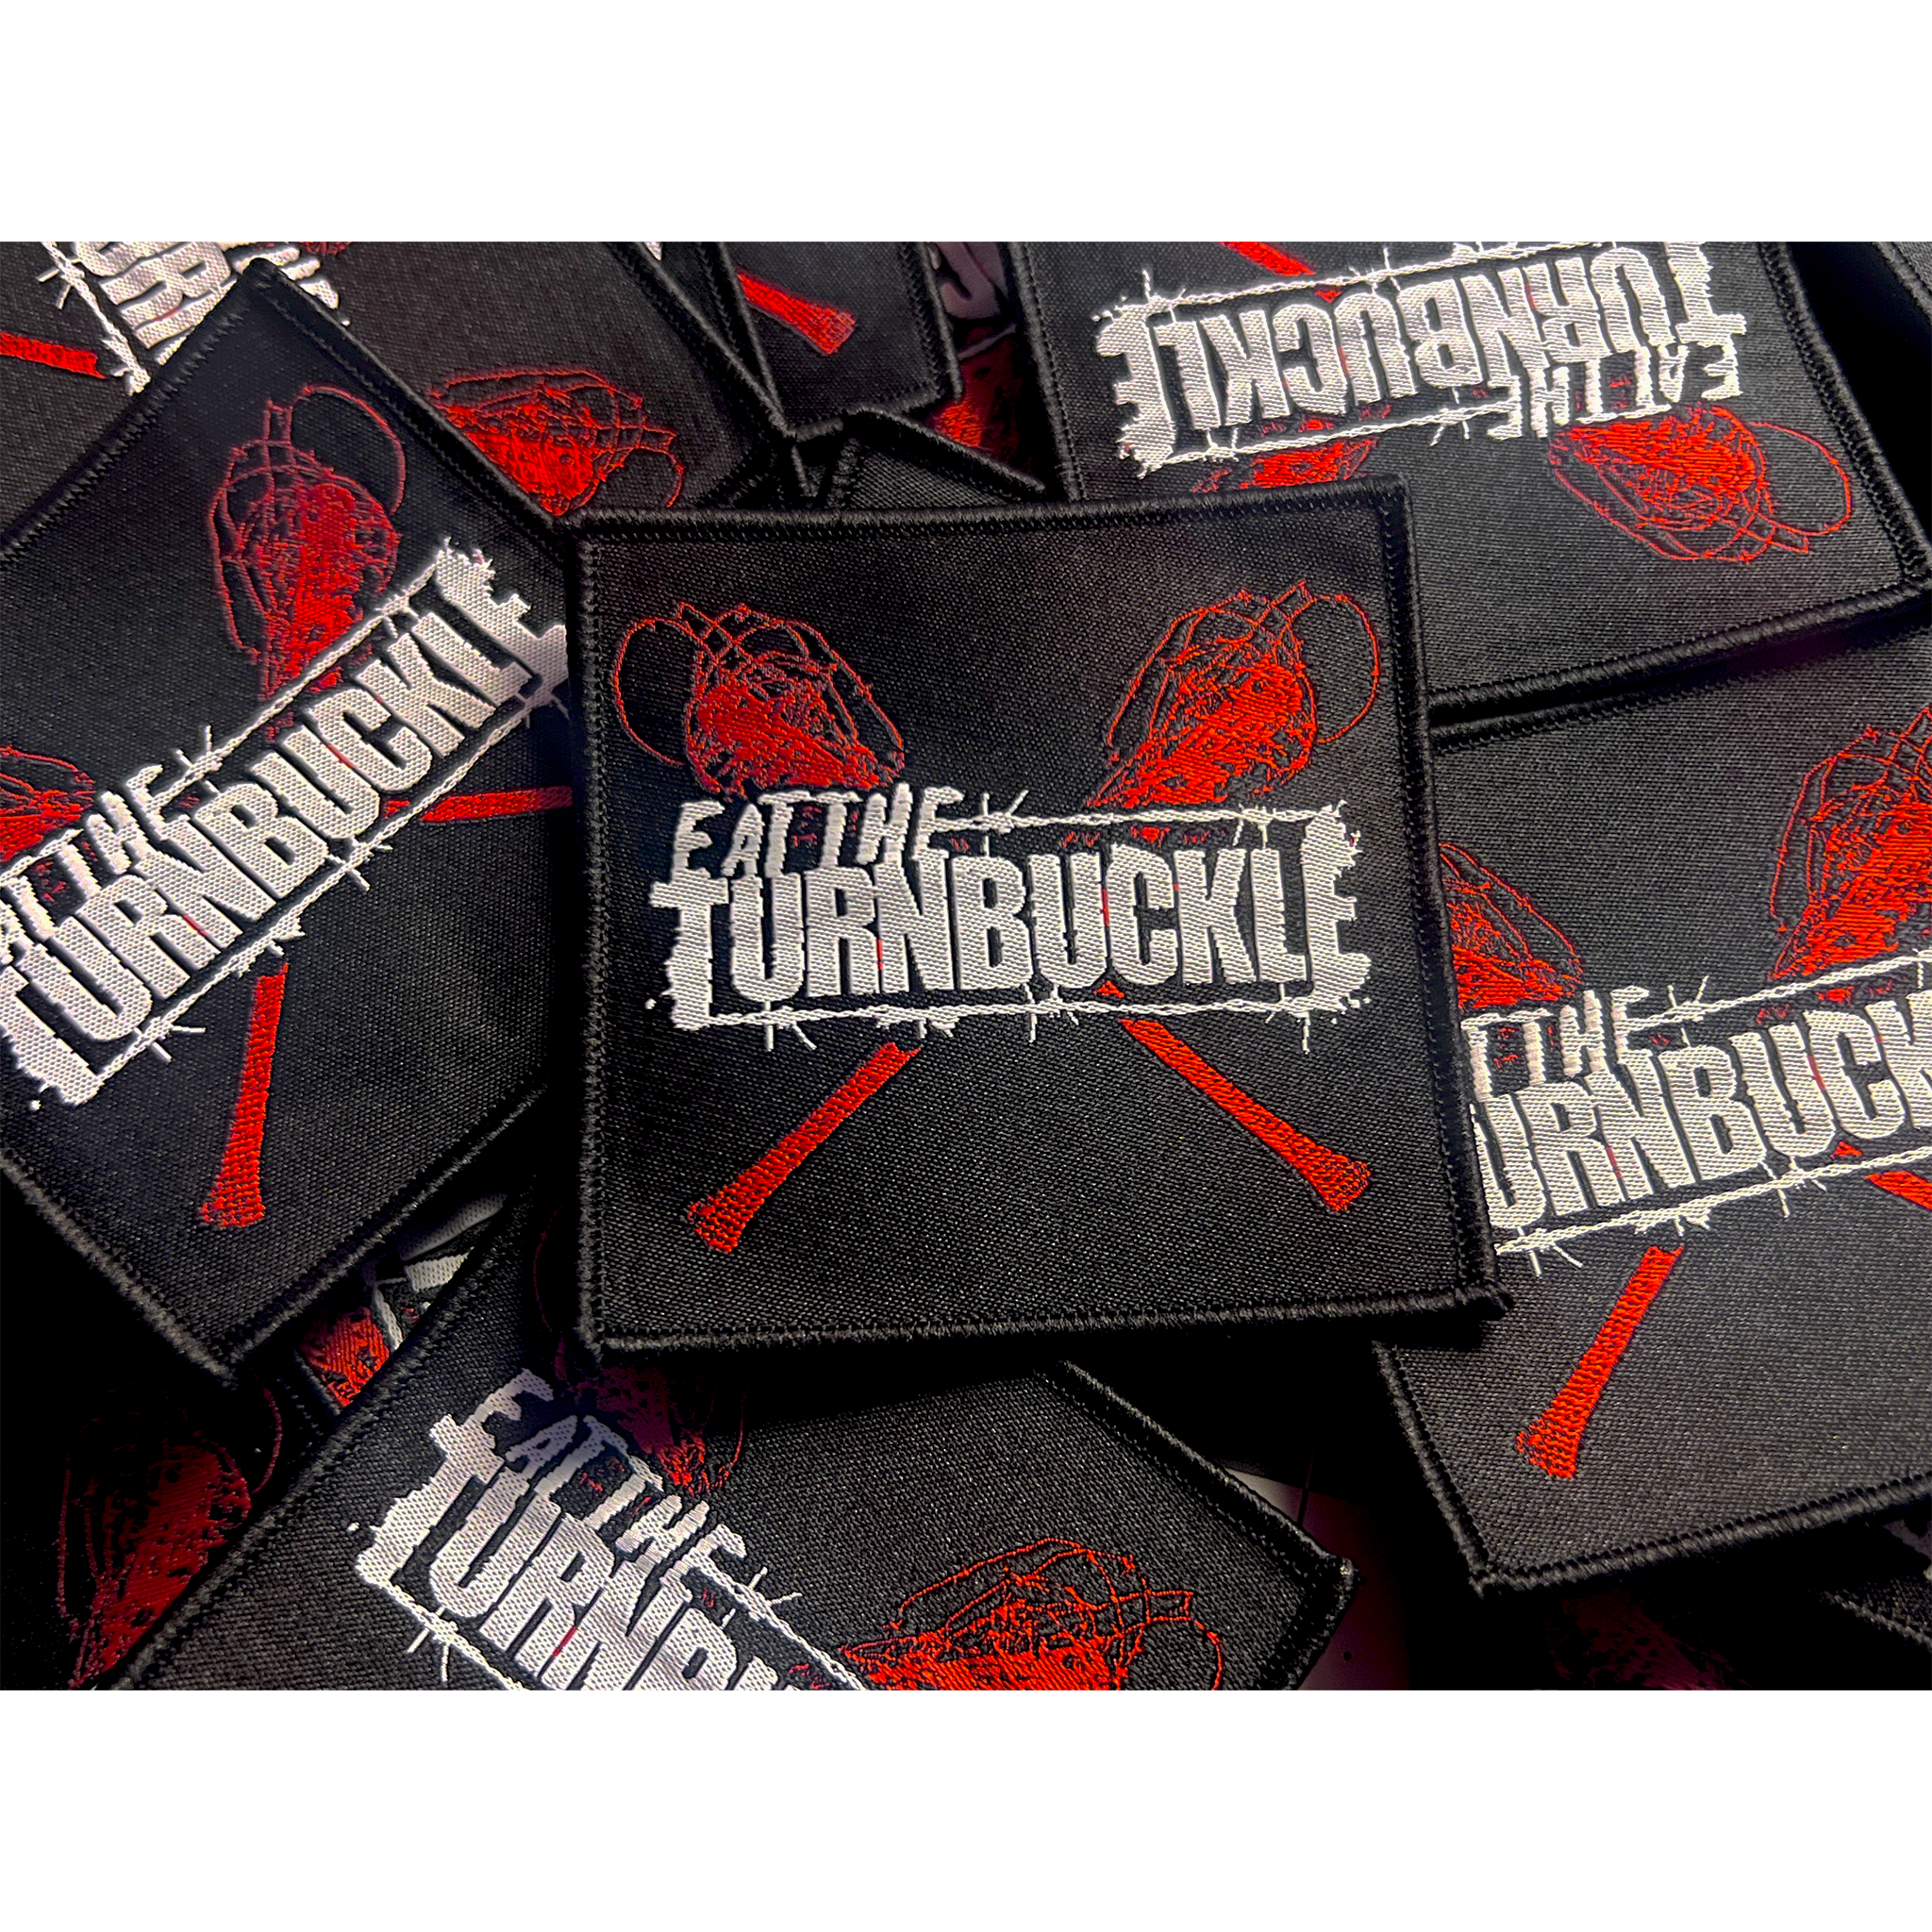 Eat The Turnbuckle Patches (Two for $10 Deal)